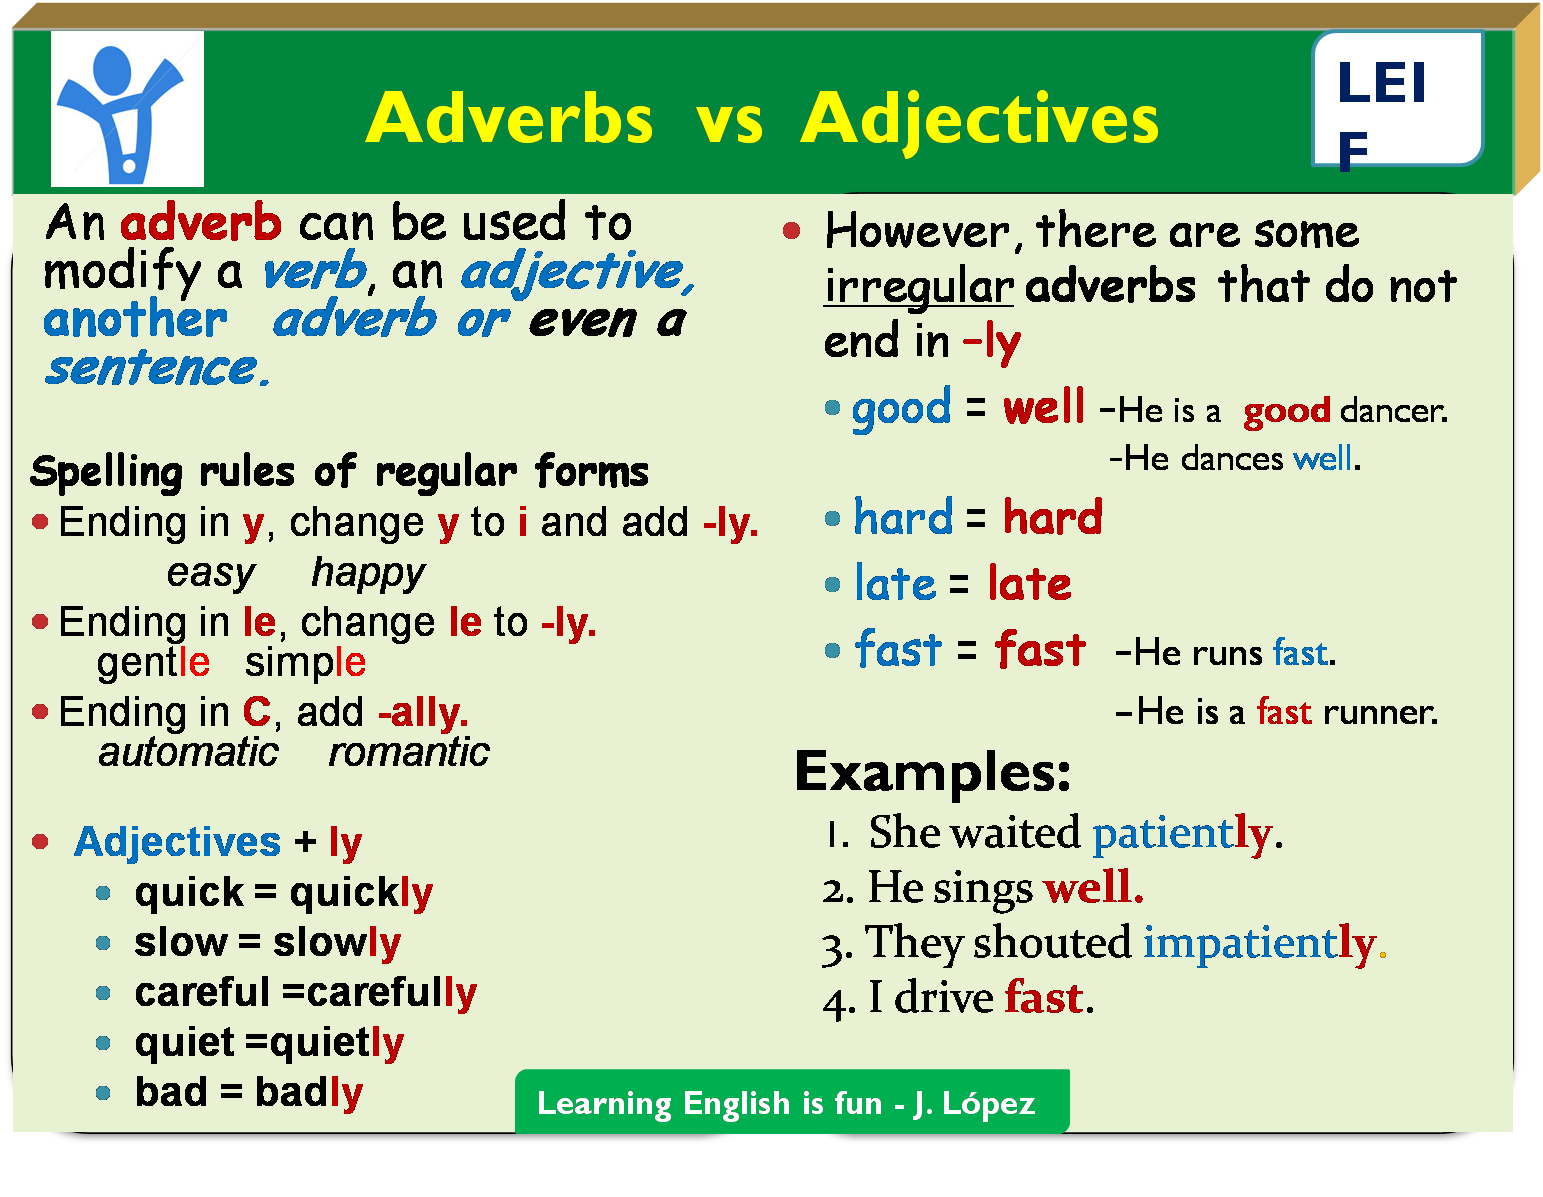 Does he sing. Adjective adverb правила. Adjectives and adverbs правило. Adverb or adjective правило. Adverbs from adjectives правило.